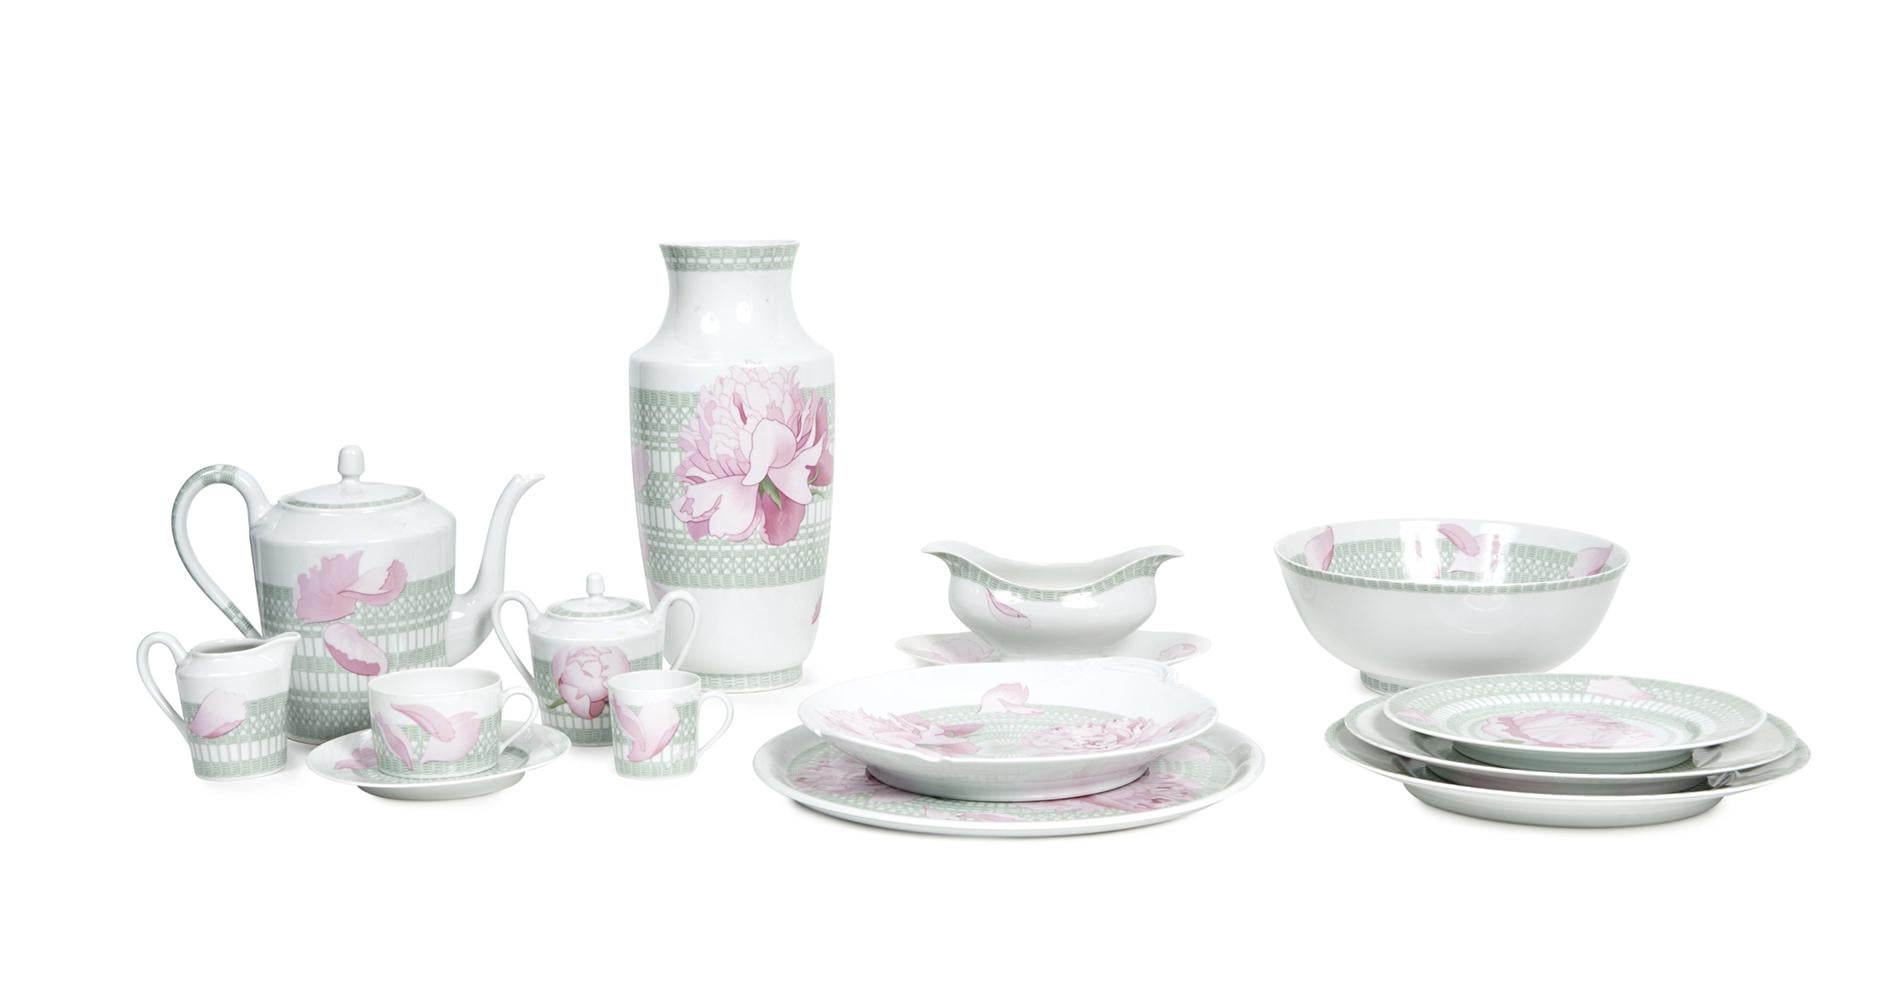 HERMES Part of service PIVOINE

Limoges porcelain

- 12 large dinner plates
- 12 dinner plates,
- 12 dessert plates
- 12 small plates

- A round dish,
- 12 coffee cups with saucers,
- A creamer
- A sugar bowl
- A jug,
- 6 tea cups with